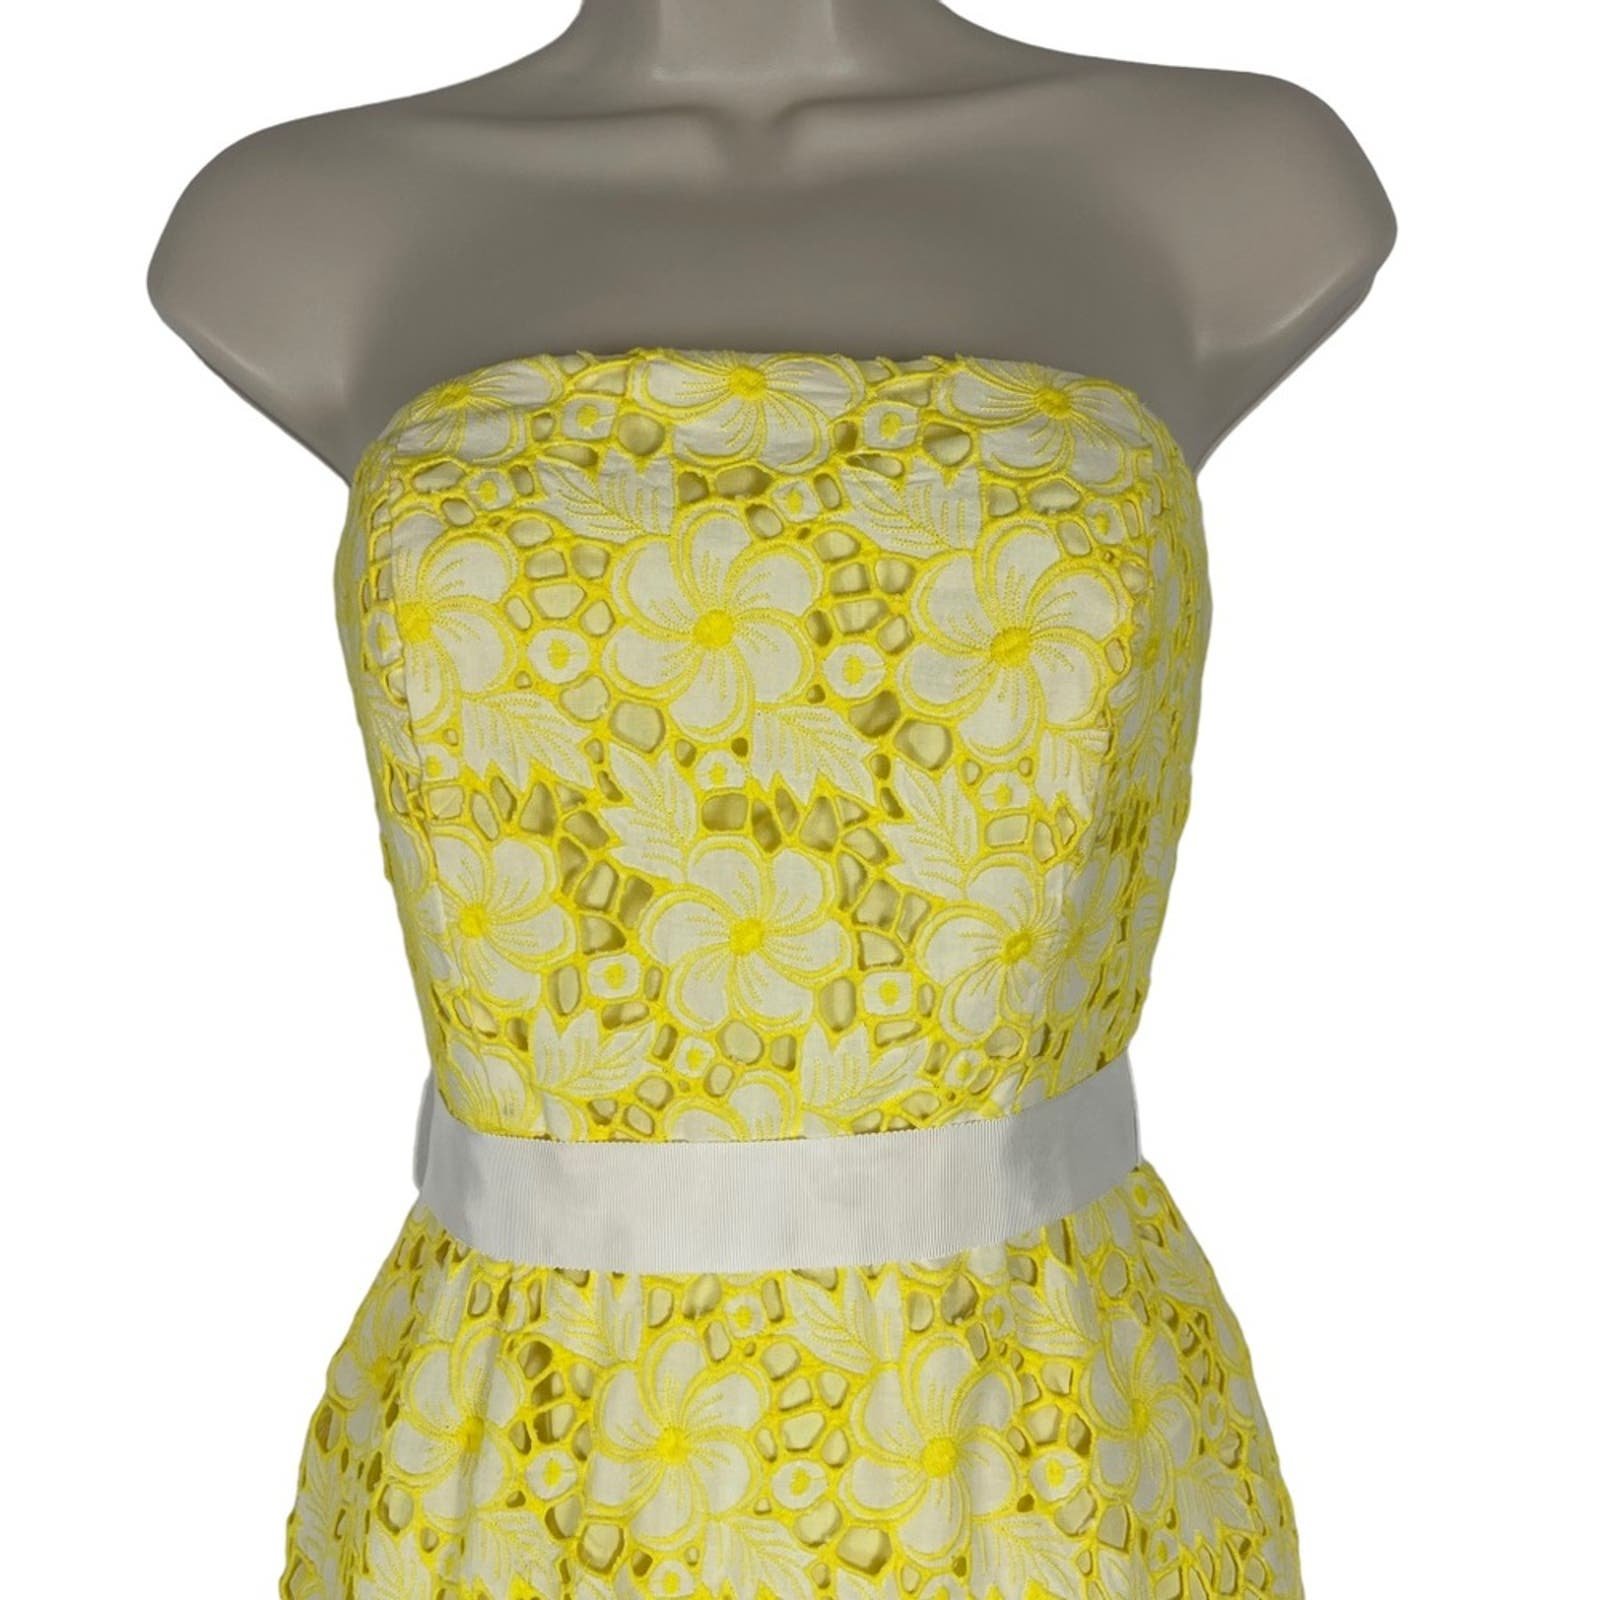 good price Lilly Pulitzer 90´s Strapless Sienna Yellow Floral Kentucky Eyelet Lace Size 2 iducirw0P Wholesale